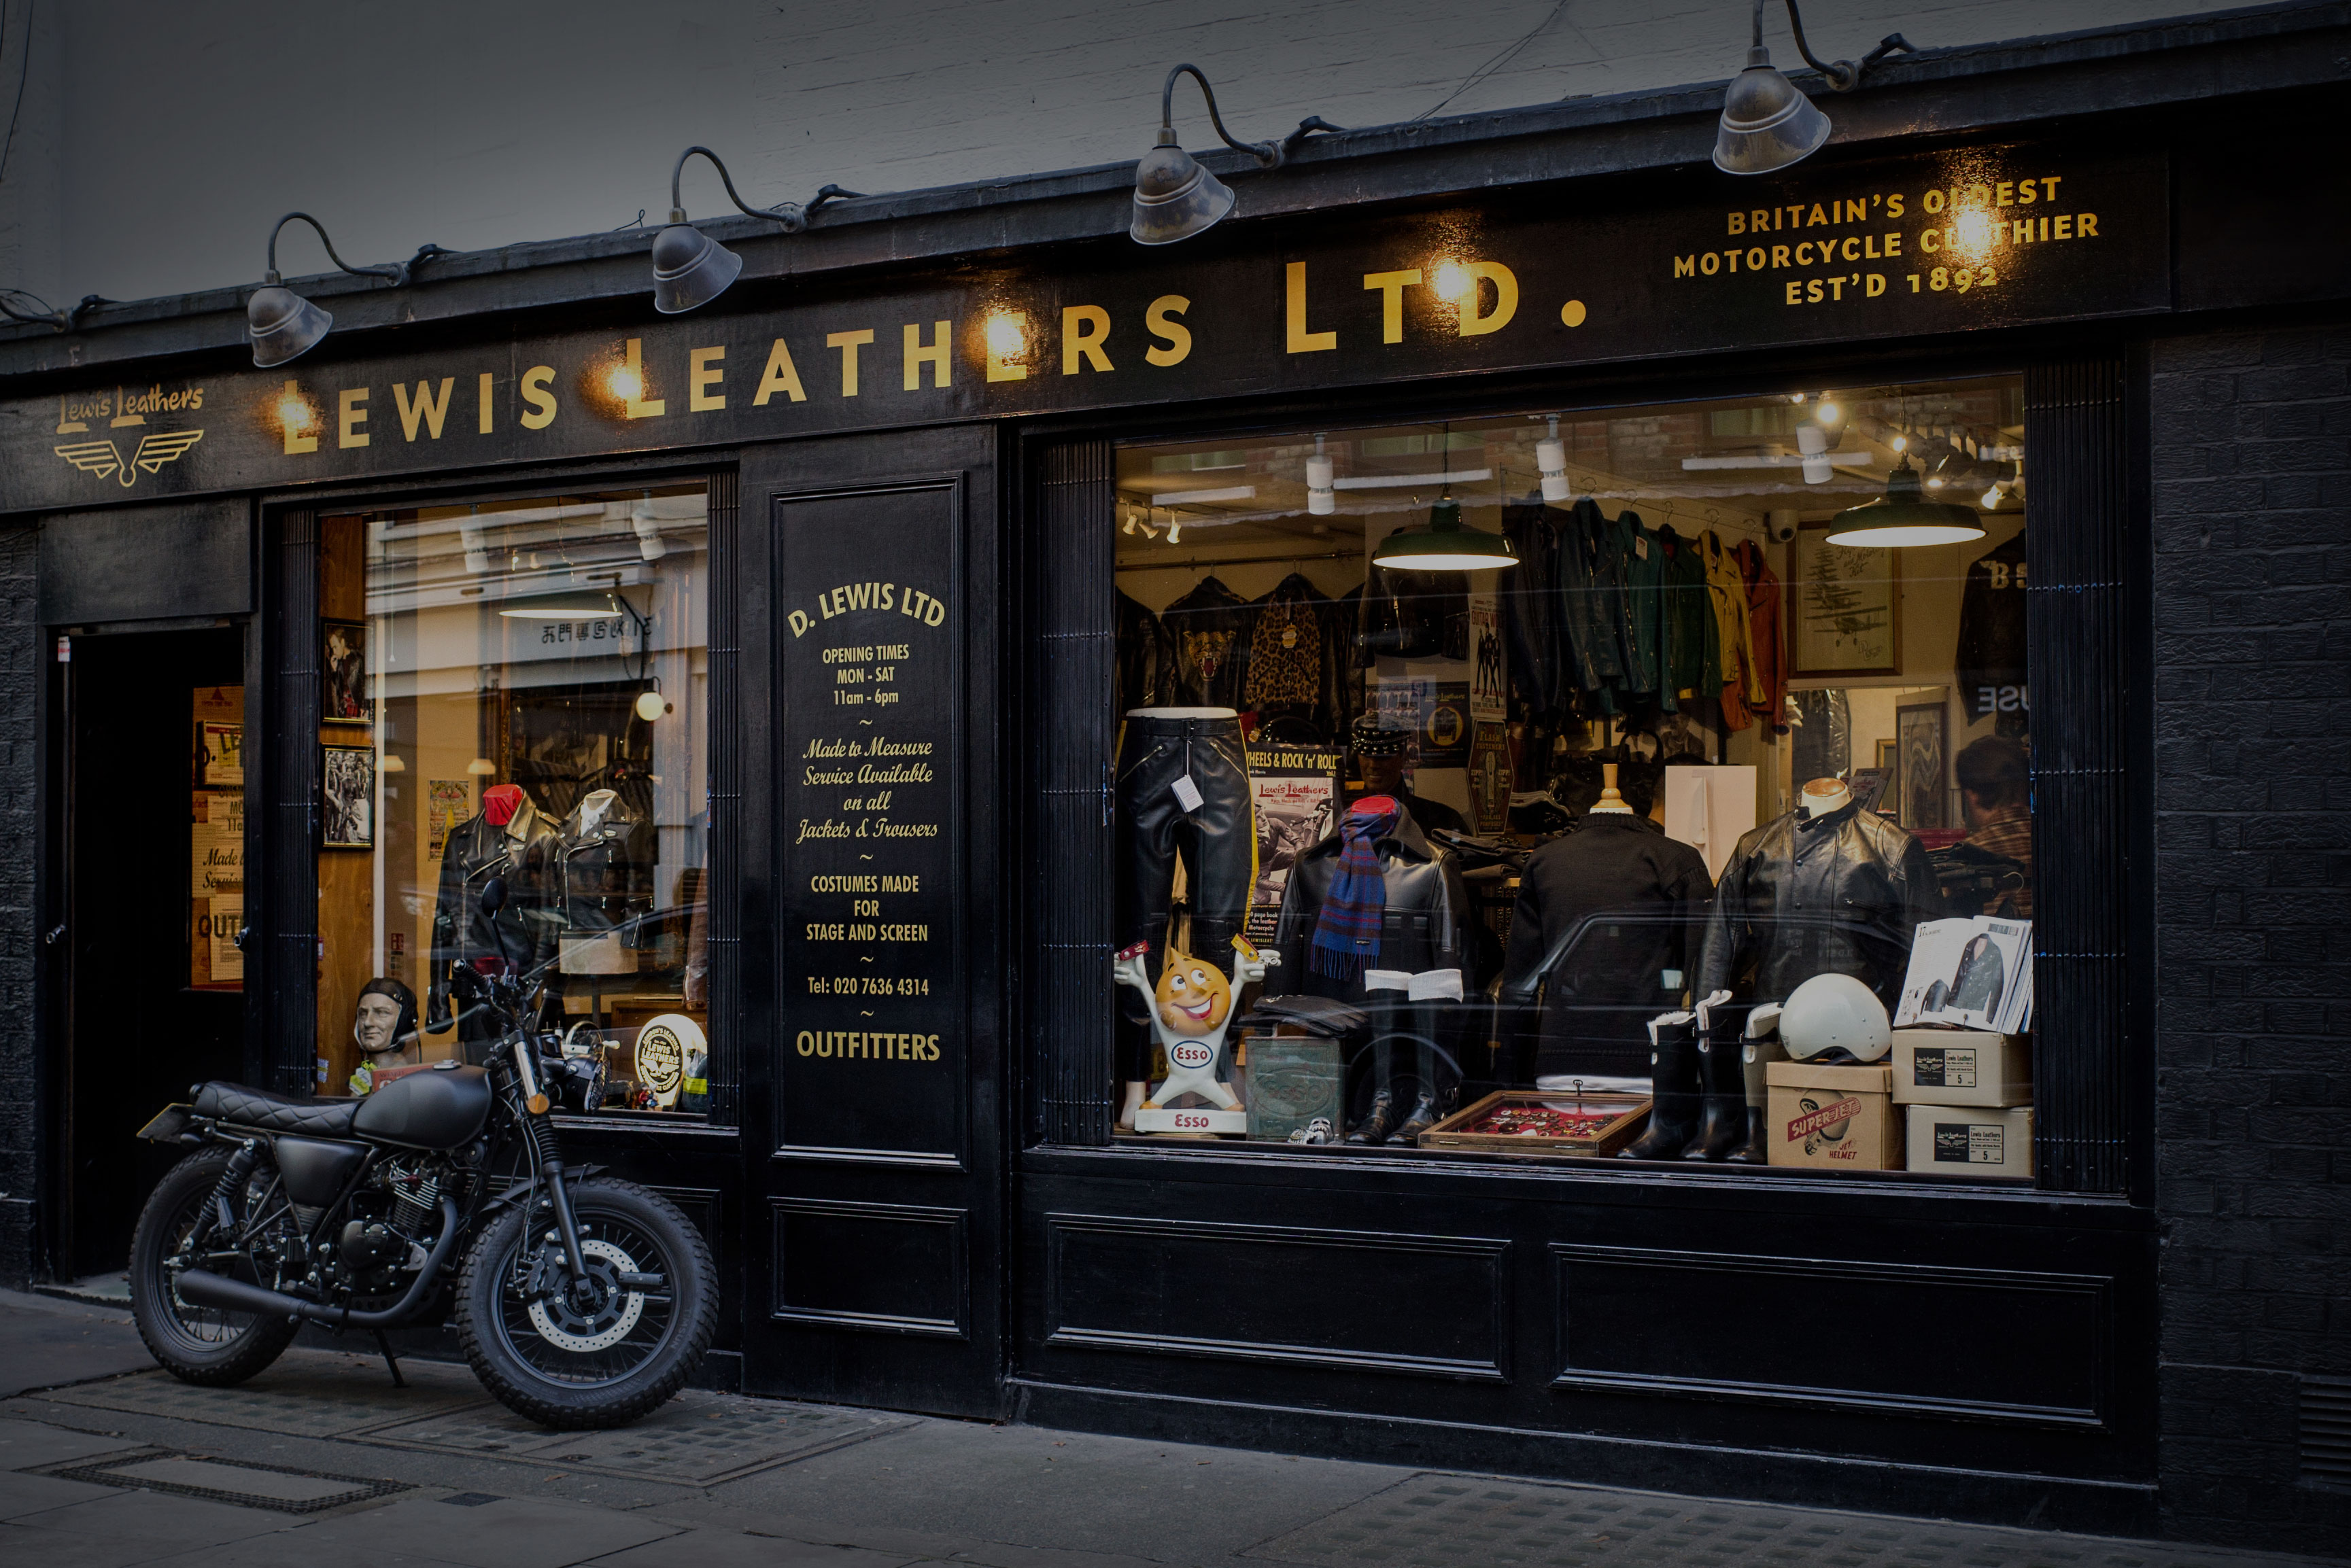 Lewis Leathers – keeping bikers brilliantly stylish since 1892